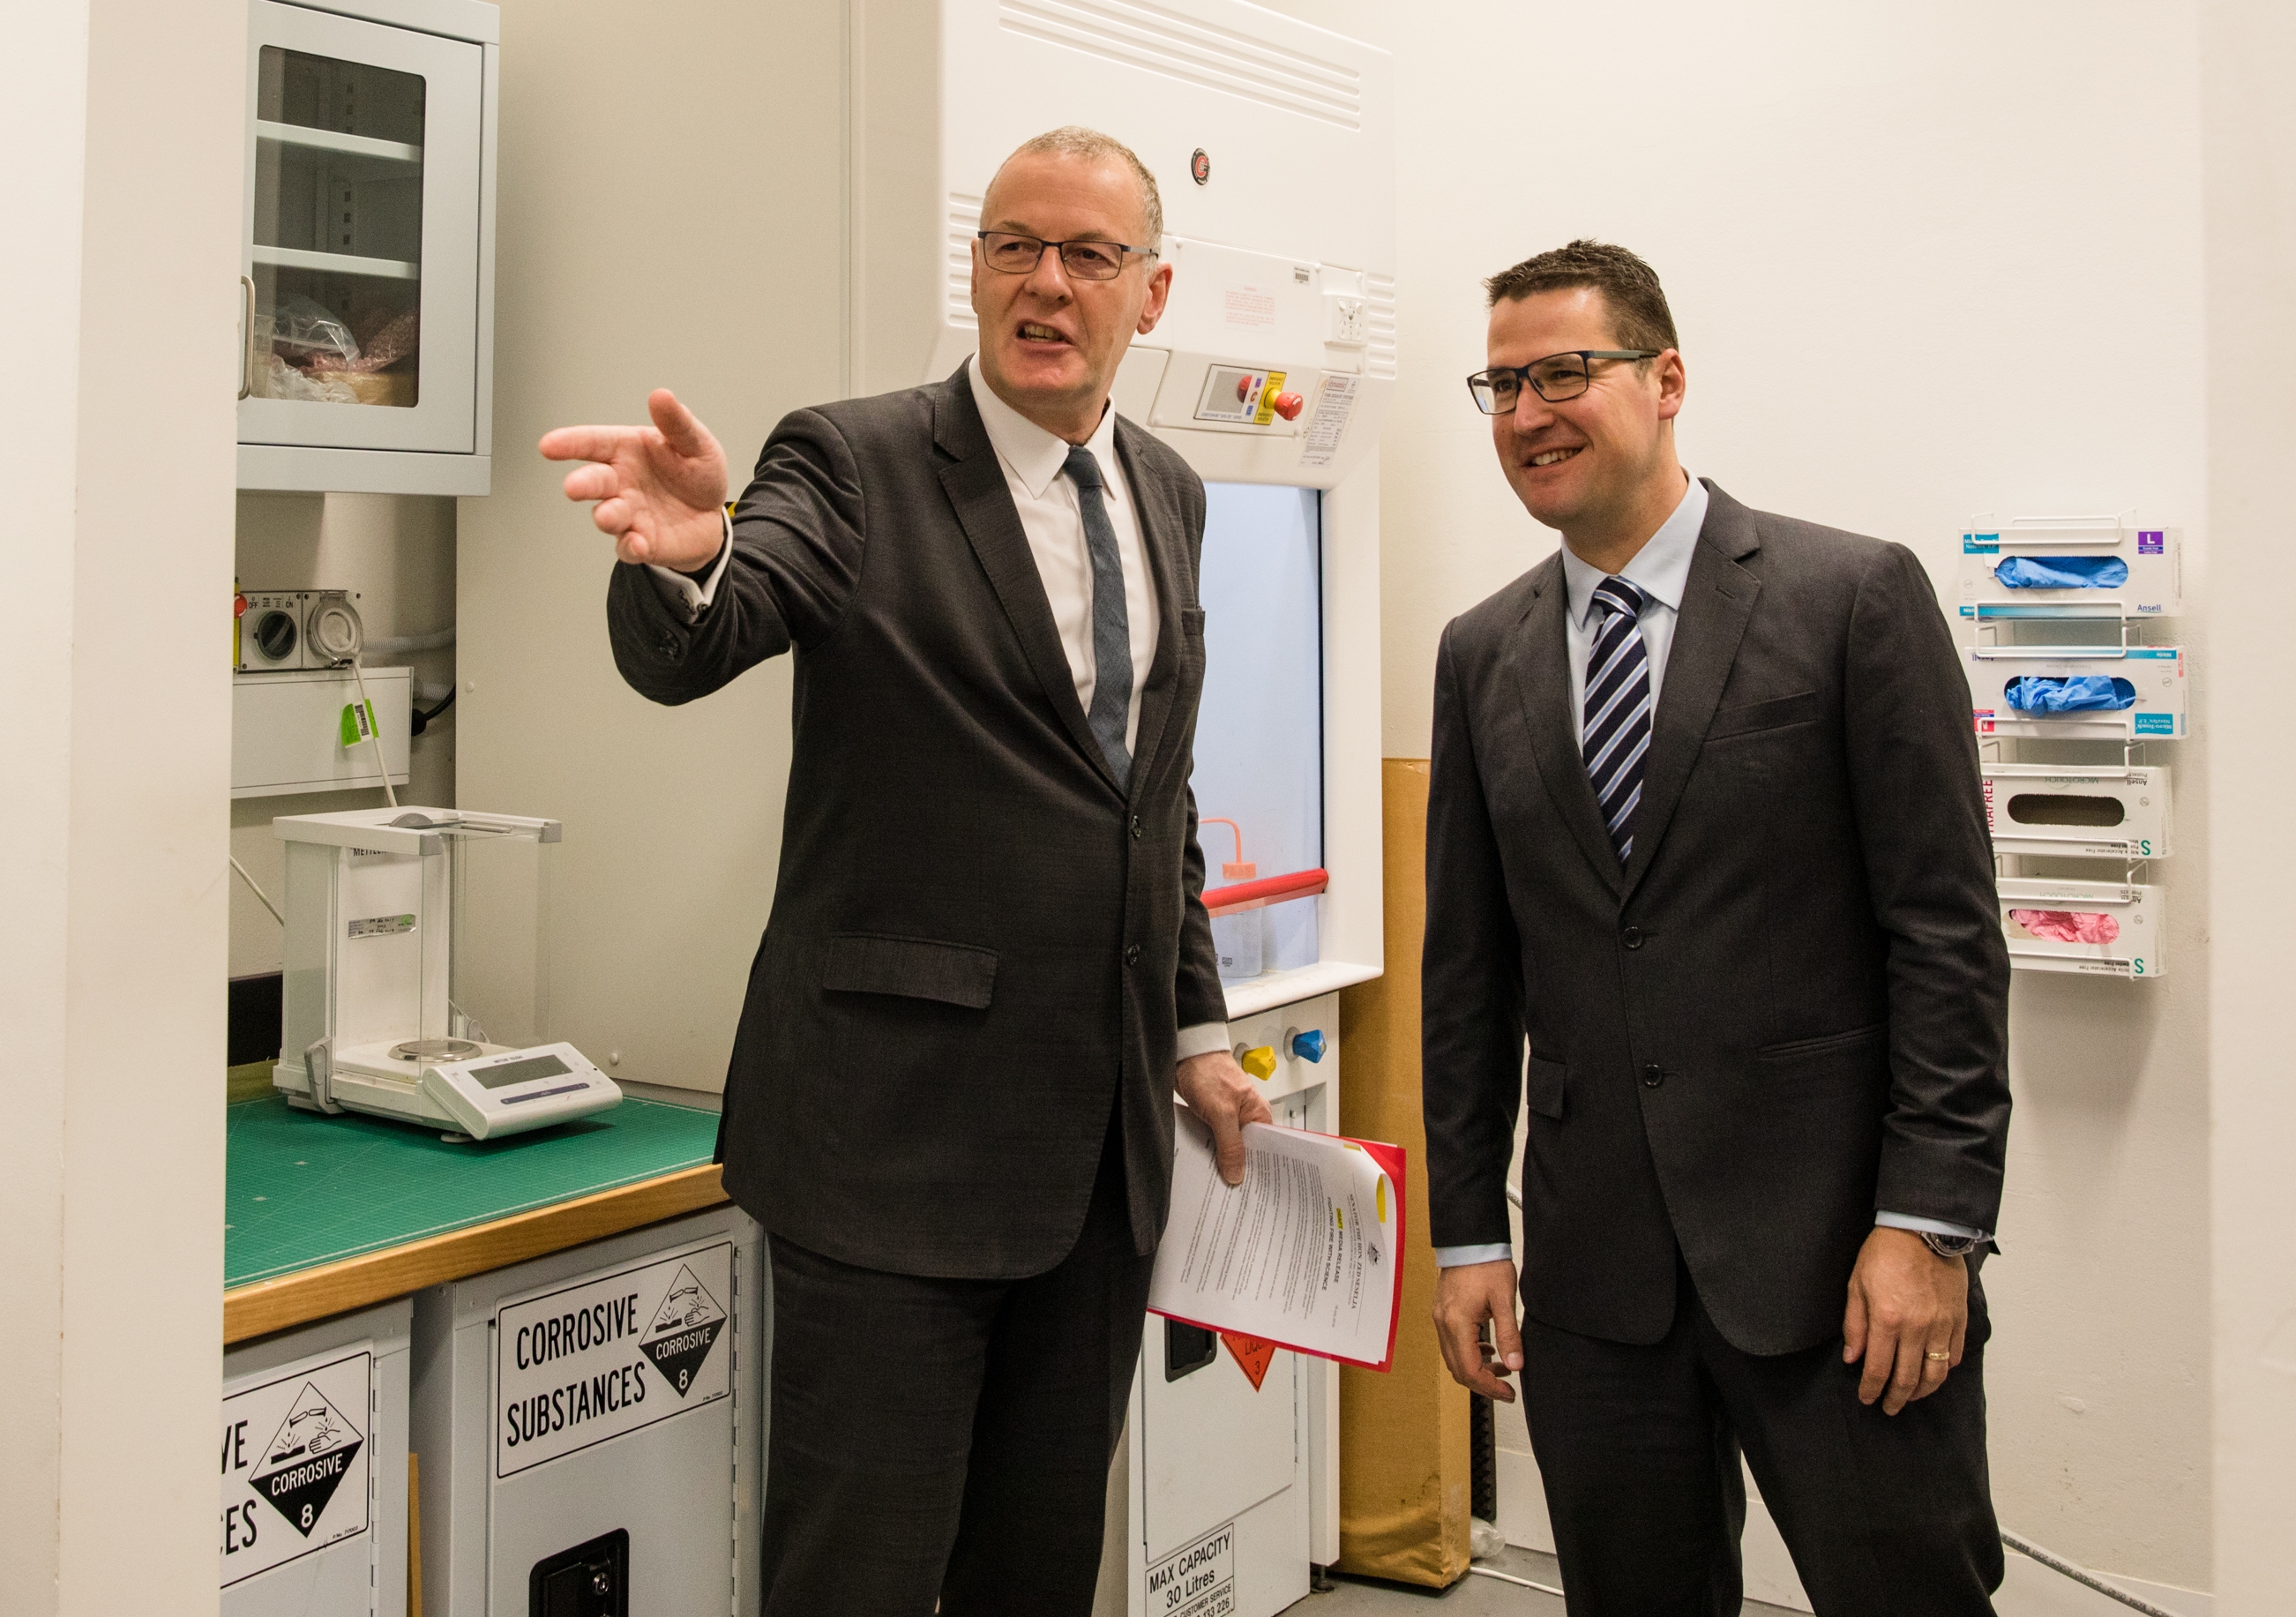 Brian Boyle, UNSW Deputy Vice-Chancellor for Enterprise (left) and Zed Seselja, Assistant Minister for Science, Jobs and Innovation, tour a School of Materials and Manufacturing lab where UNSW researchers are working to develop an industry first ecofriendly and non-toxic fire retardant.